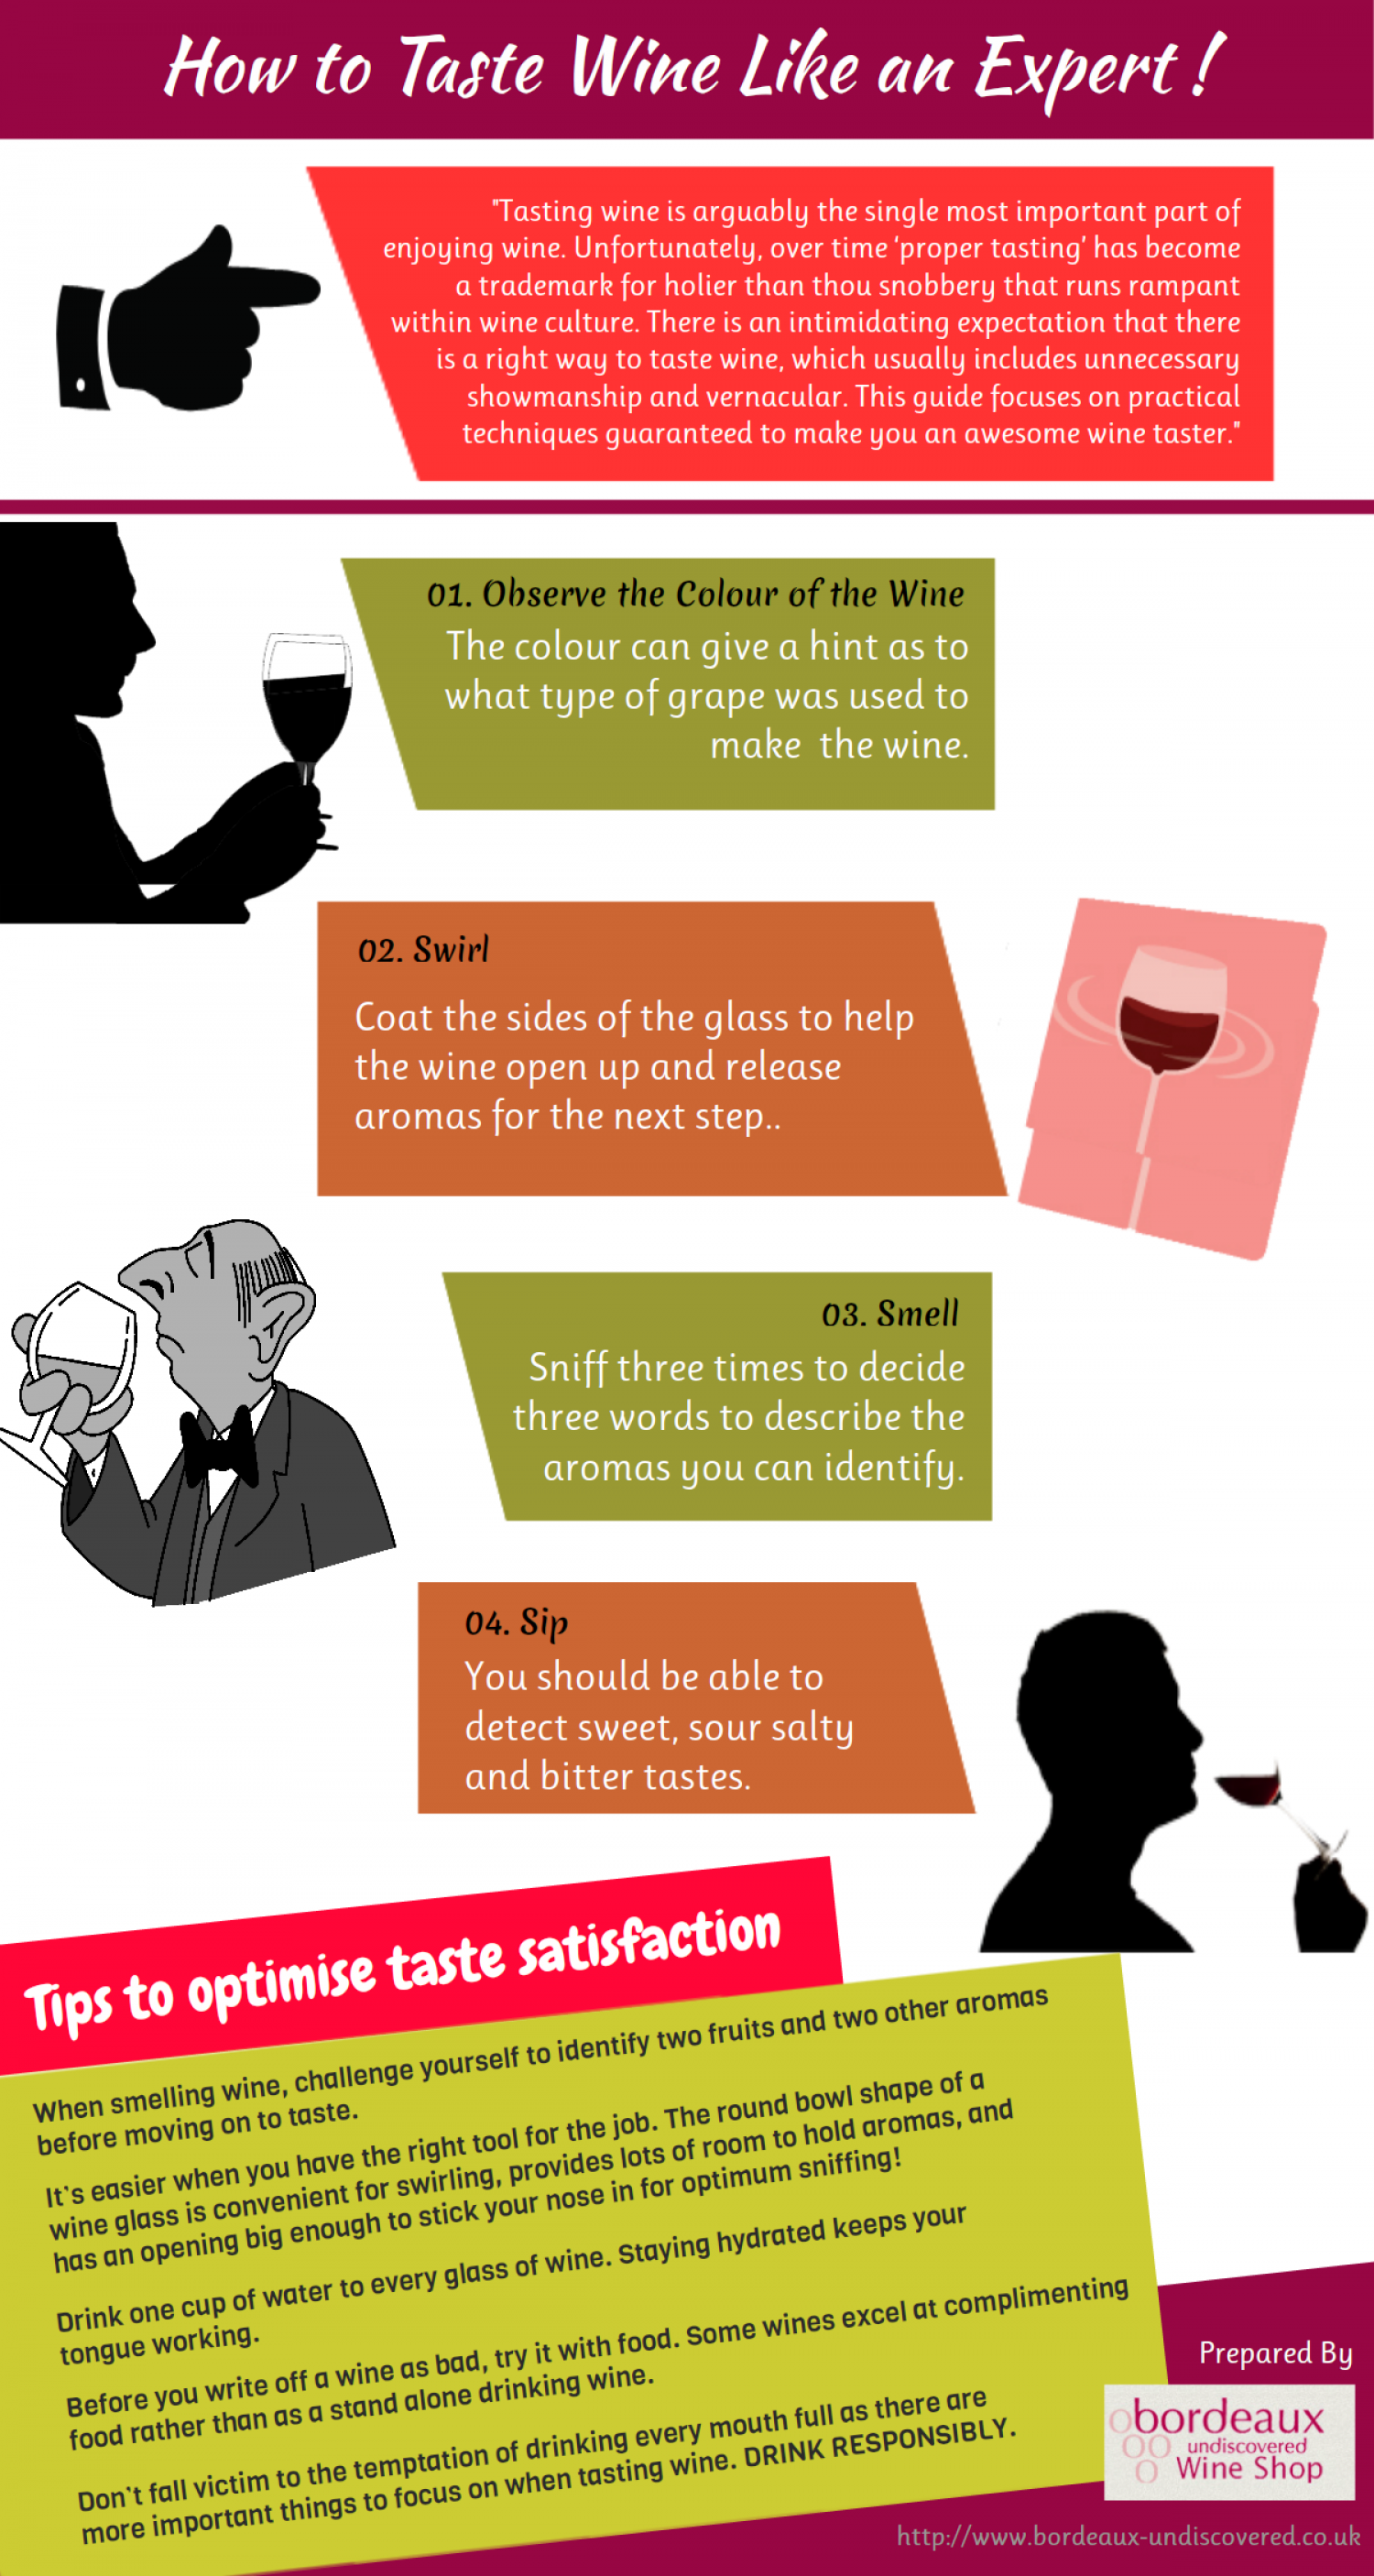 How to Taste Wine Like an Expert Infographic